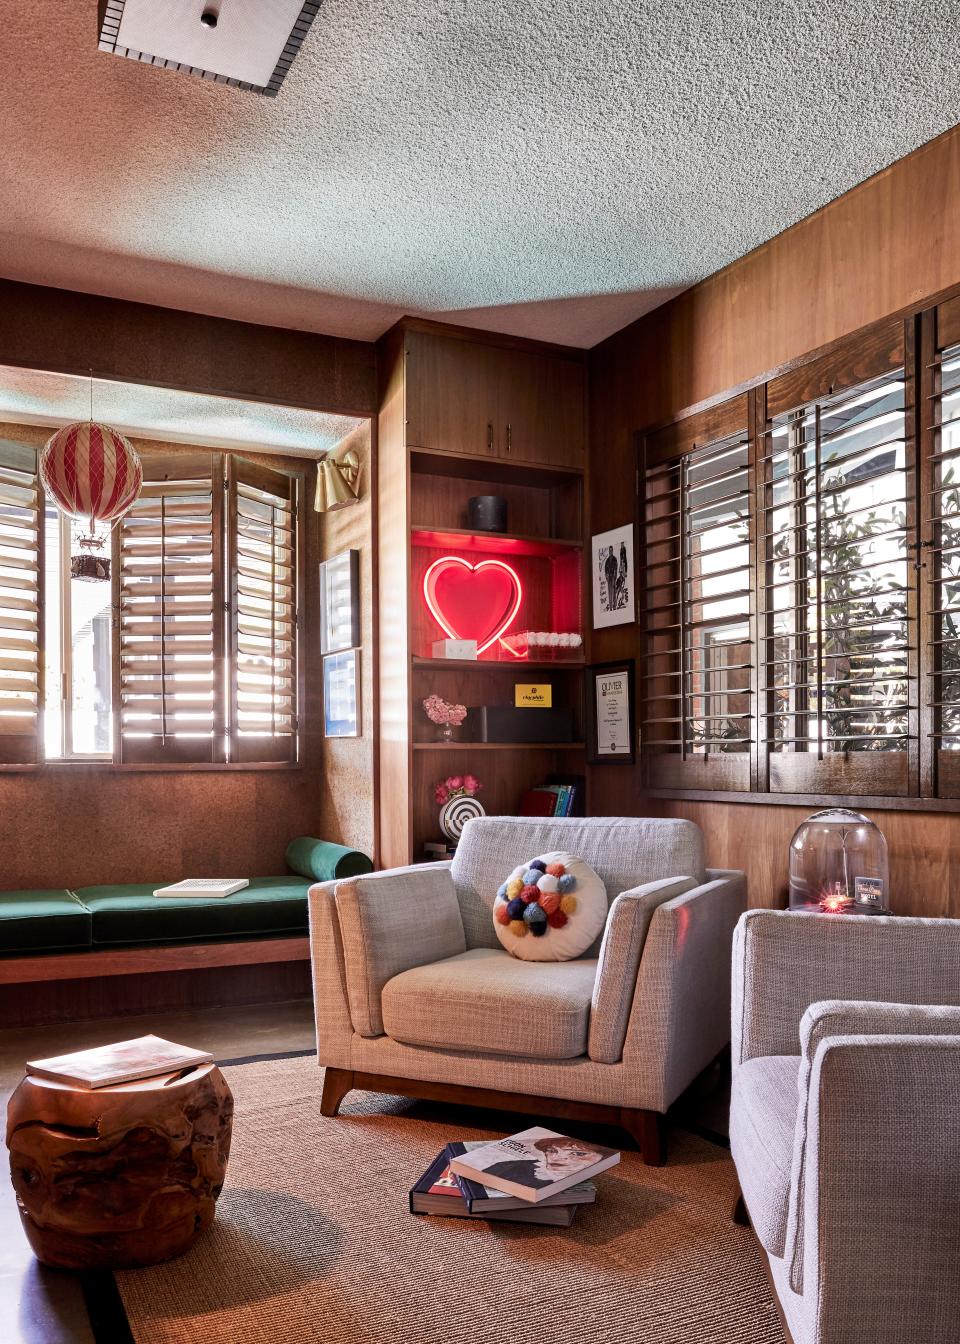 “We wanted it all to feel like Alice in Wonderland," Colman says. And a wonderland they did create. In Colman’s home office, there’s a hot air ballon and neon lights that contrast with down-to-earth Article seating and warm tones.